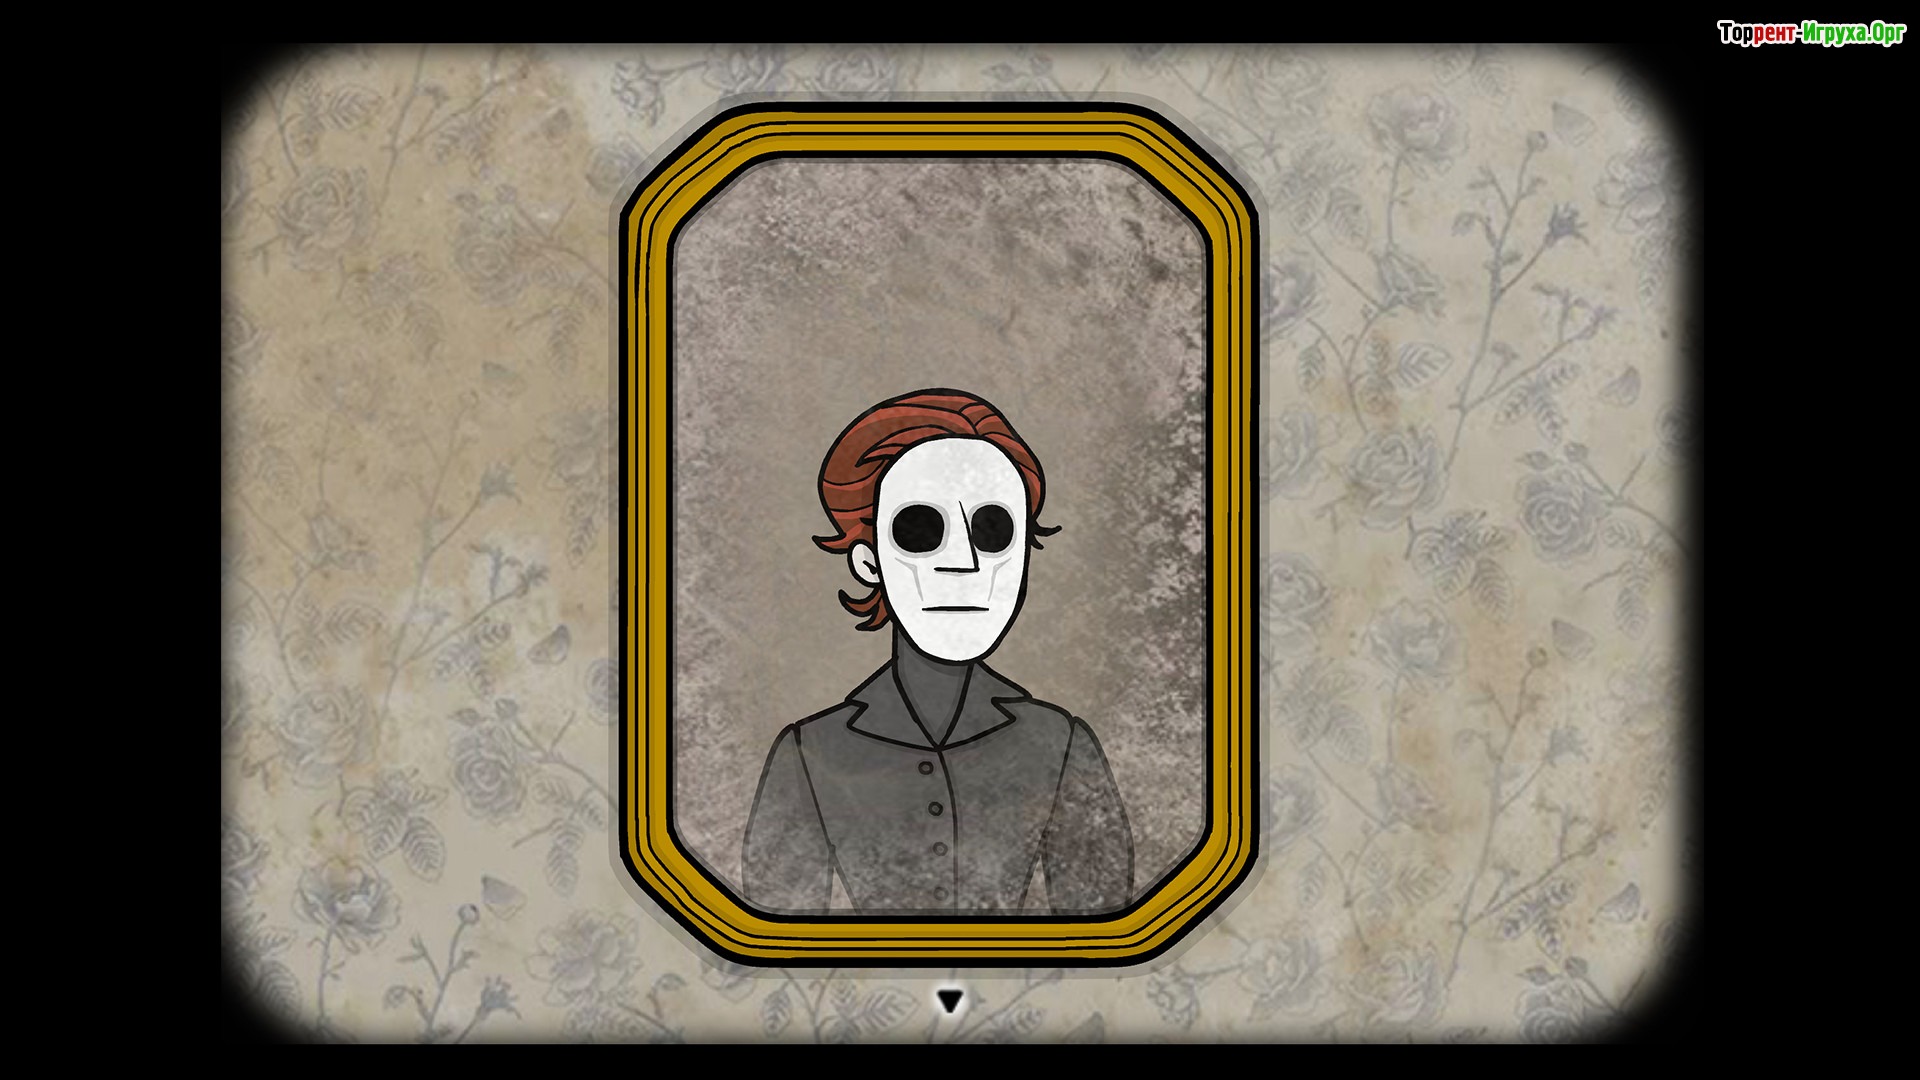 Thing of the past. Игра Rusty Lake the past within. Расти Лейк the past within. Расти Лейк Парадайс Дэвид.